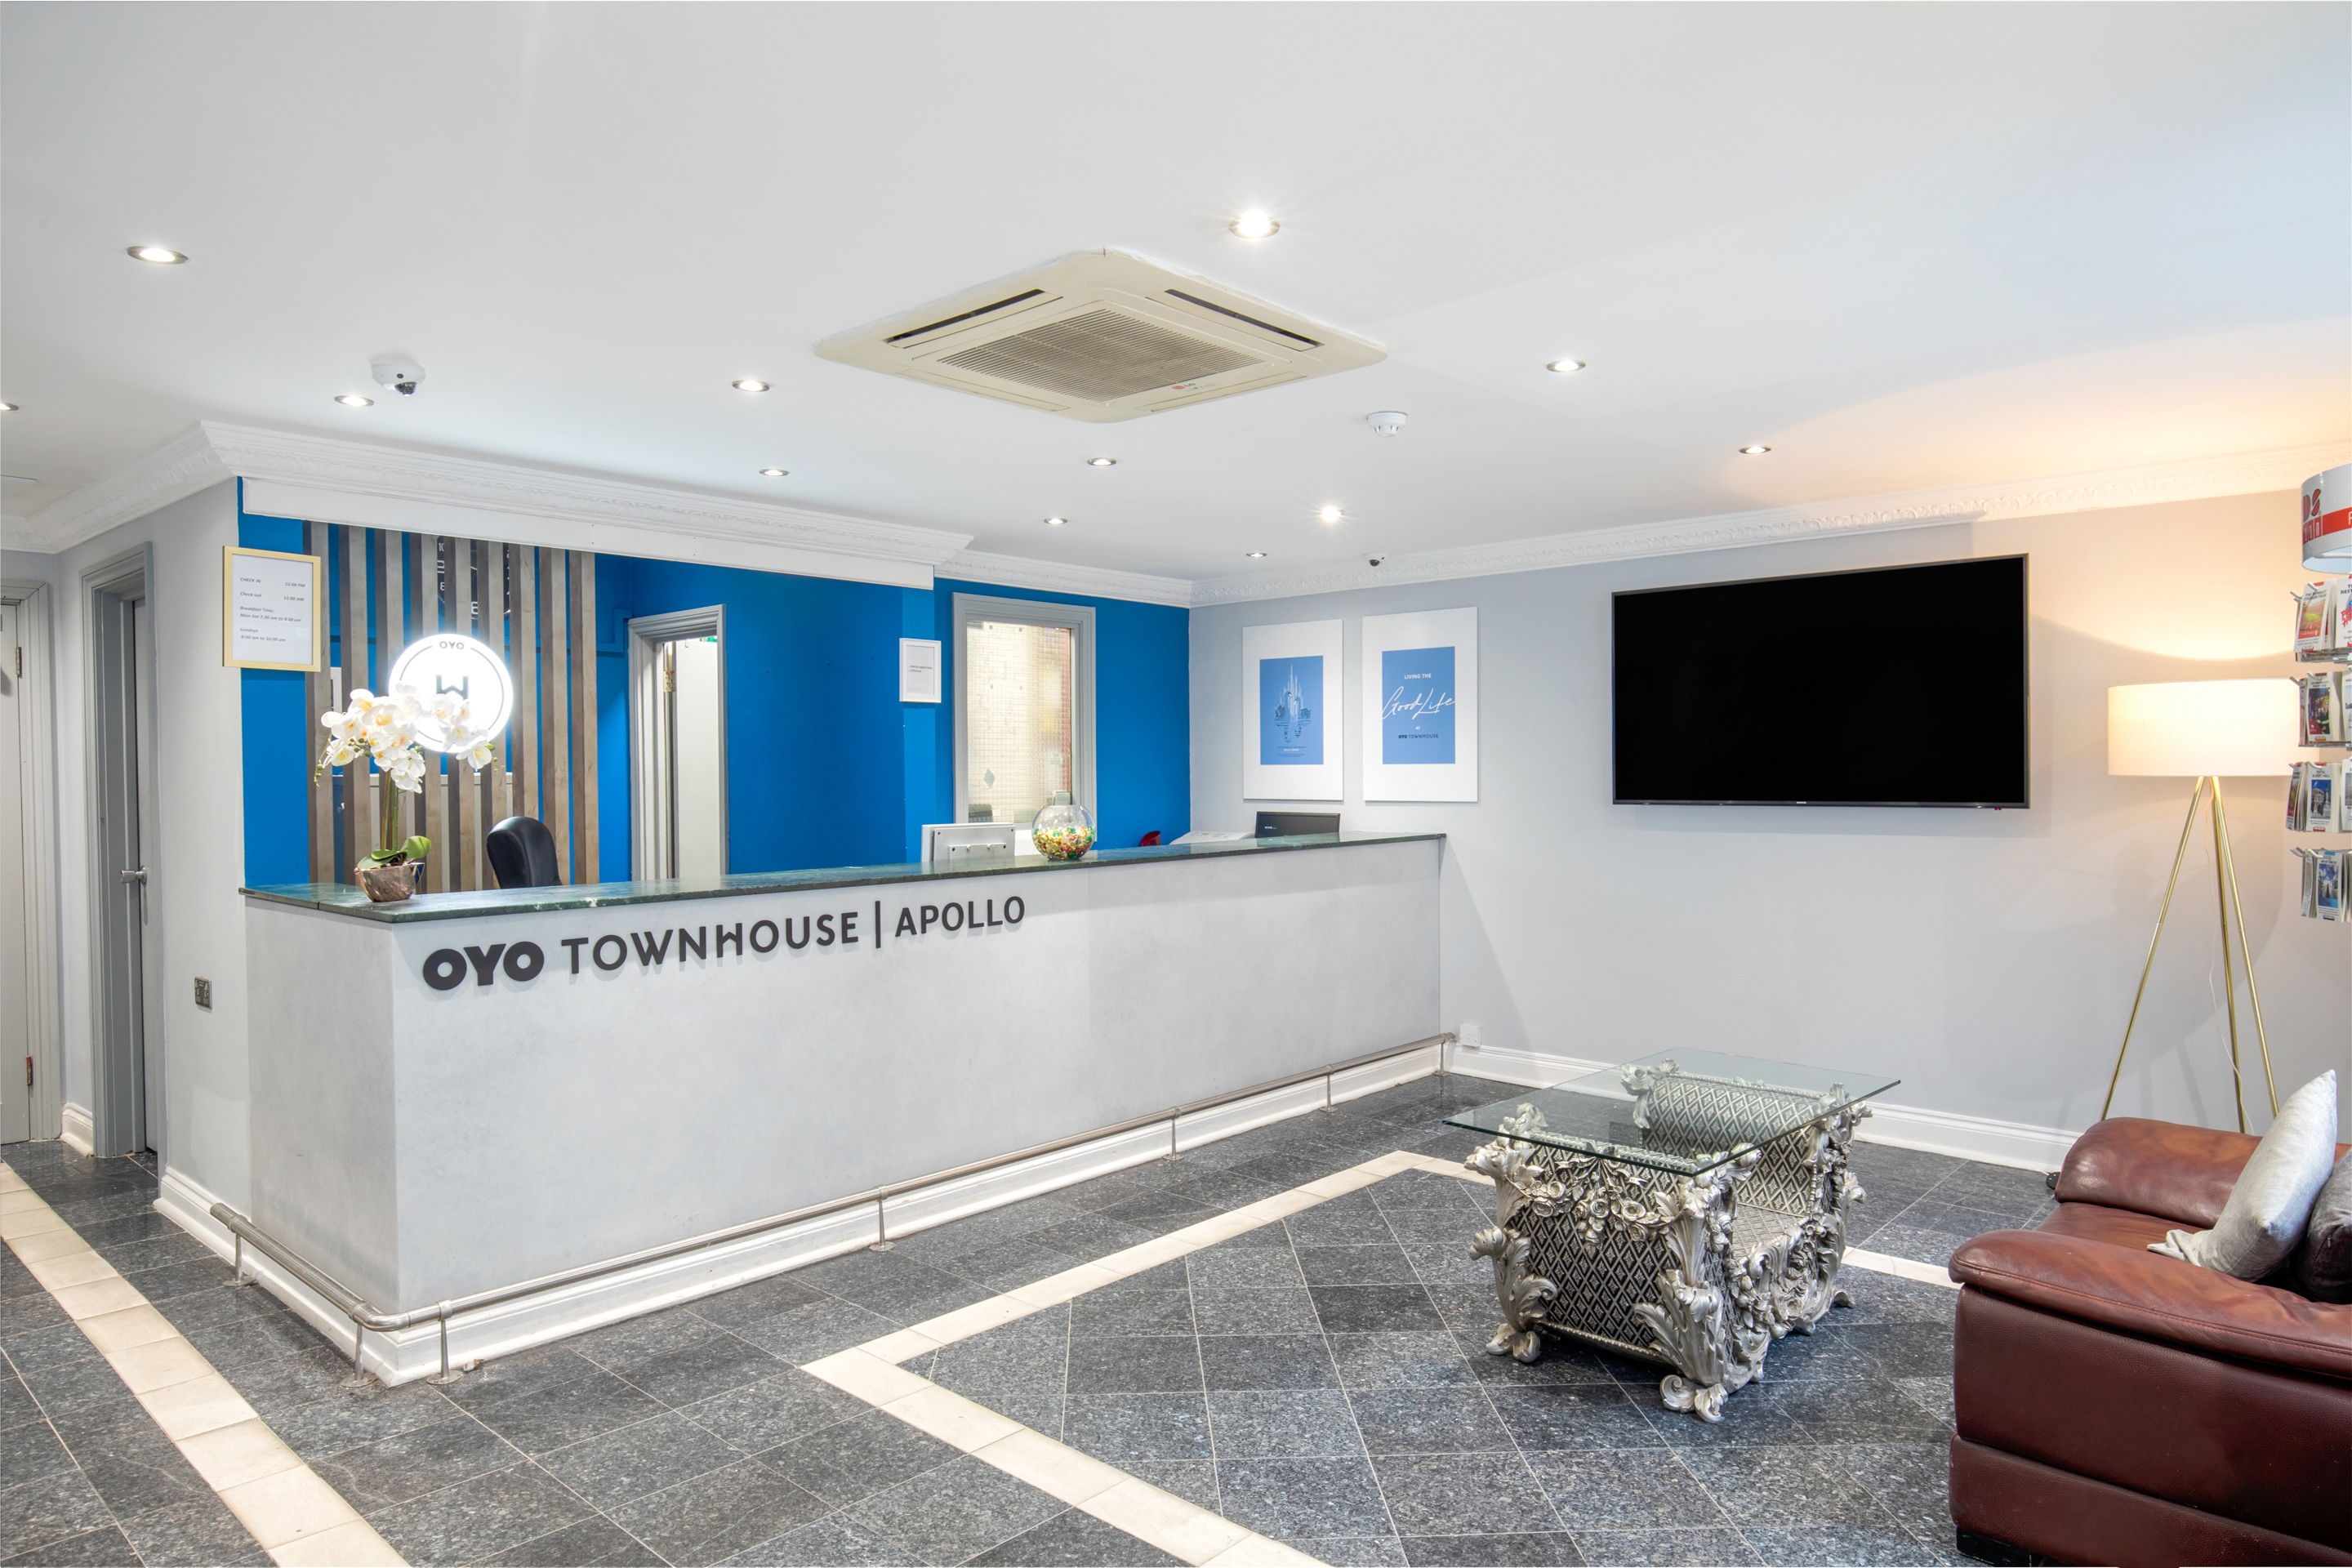 Gallery image of Oyo Townhouse Apollo, London Bayswater